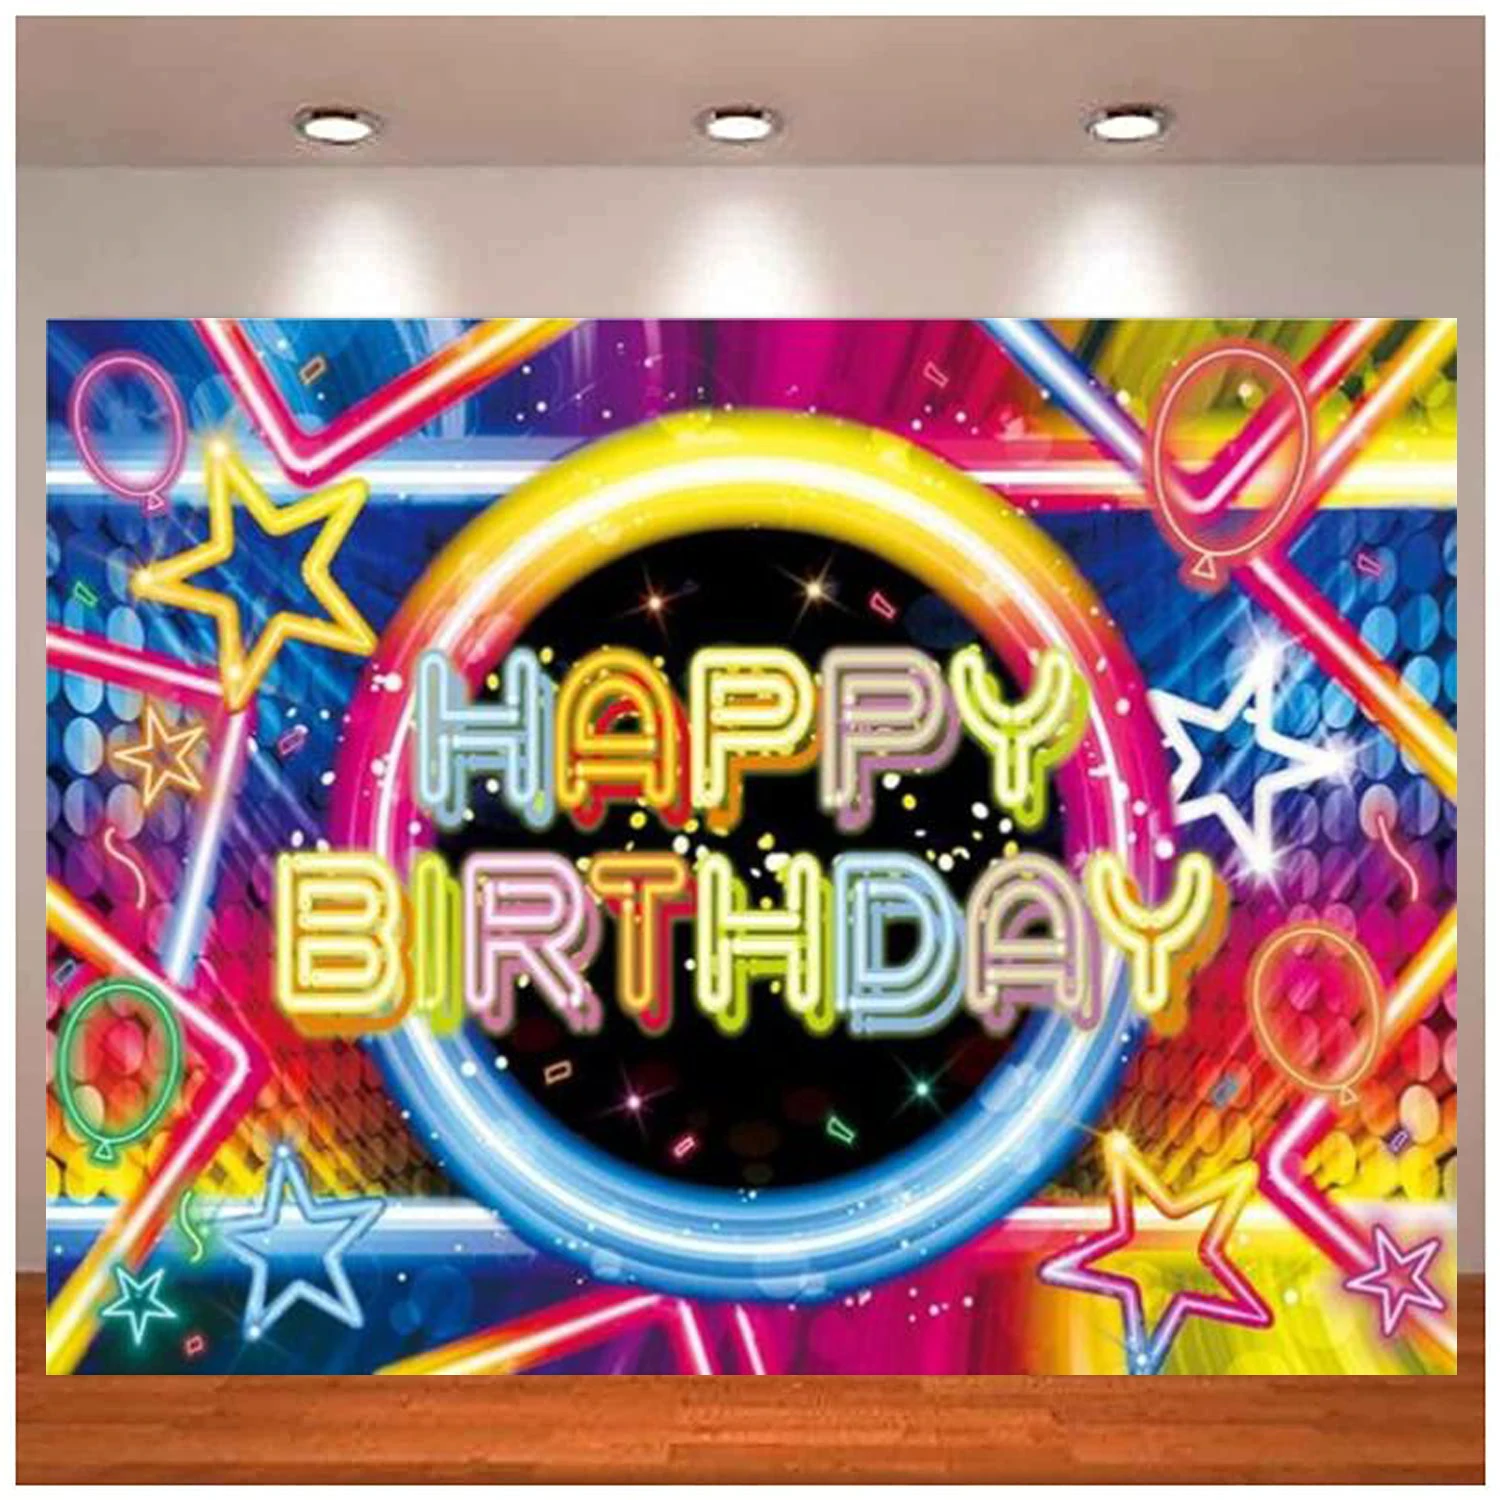 

Glow In The Dark Birthday Backdrop Colorful Neon 80s 90s Bday Crazy Sleppover Party Supplies Banner Abstract Background Decor